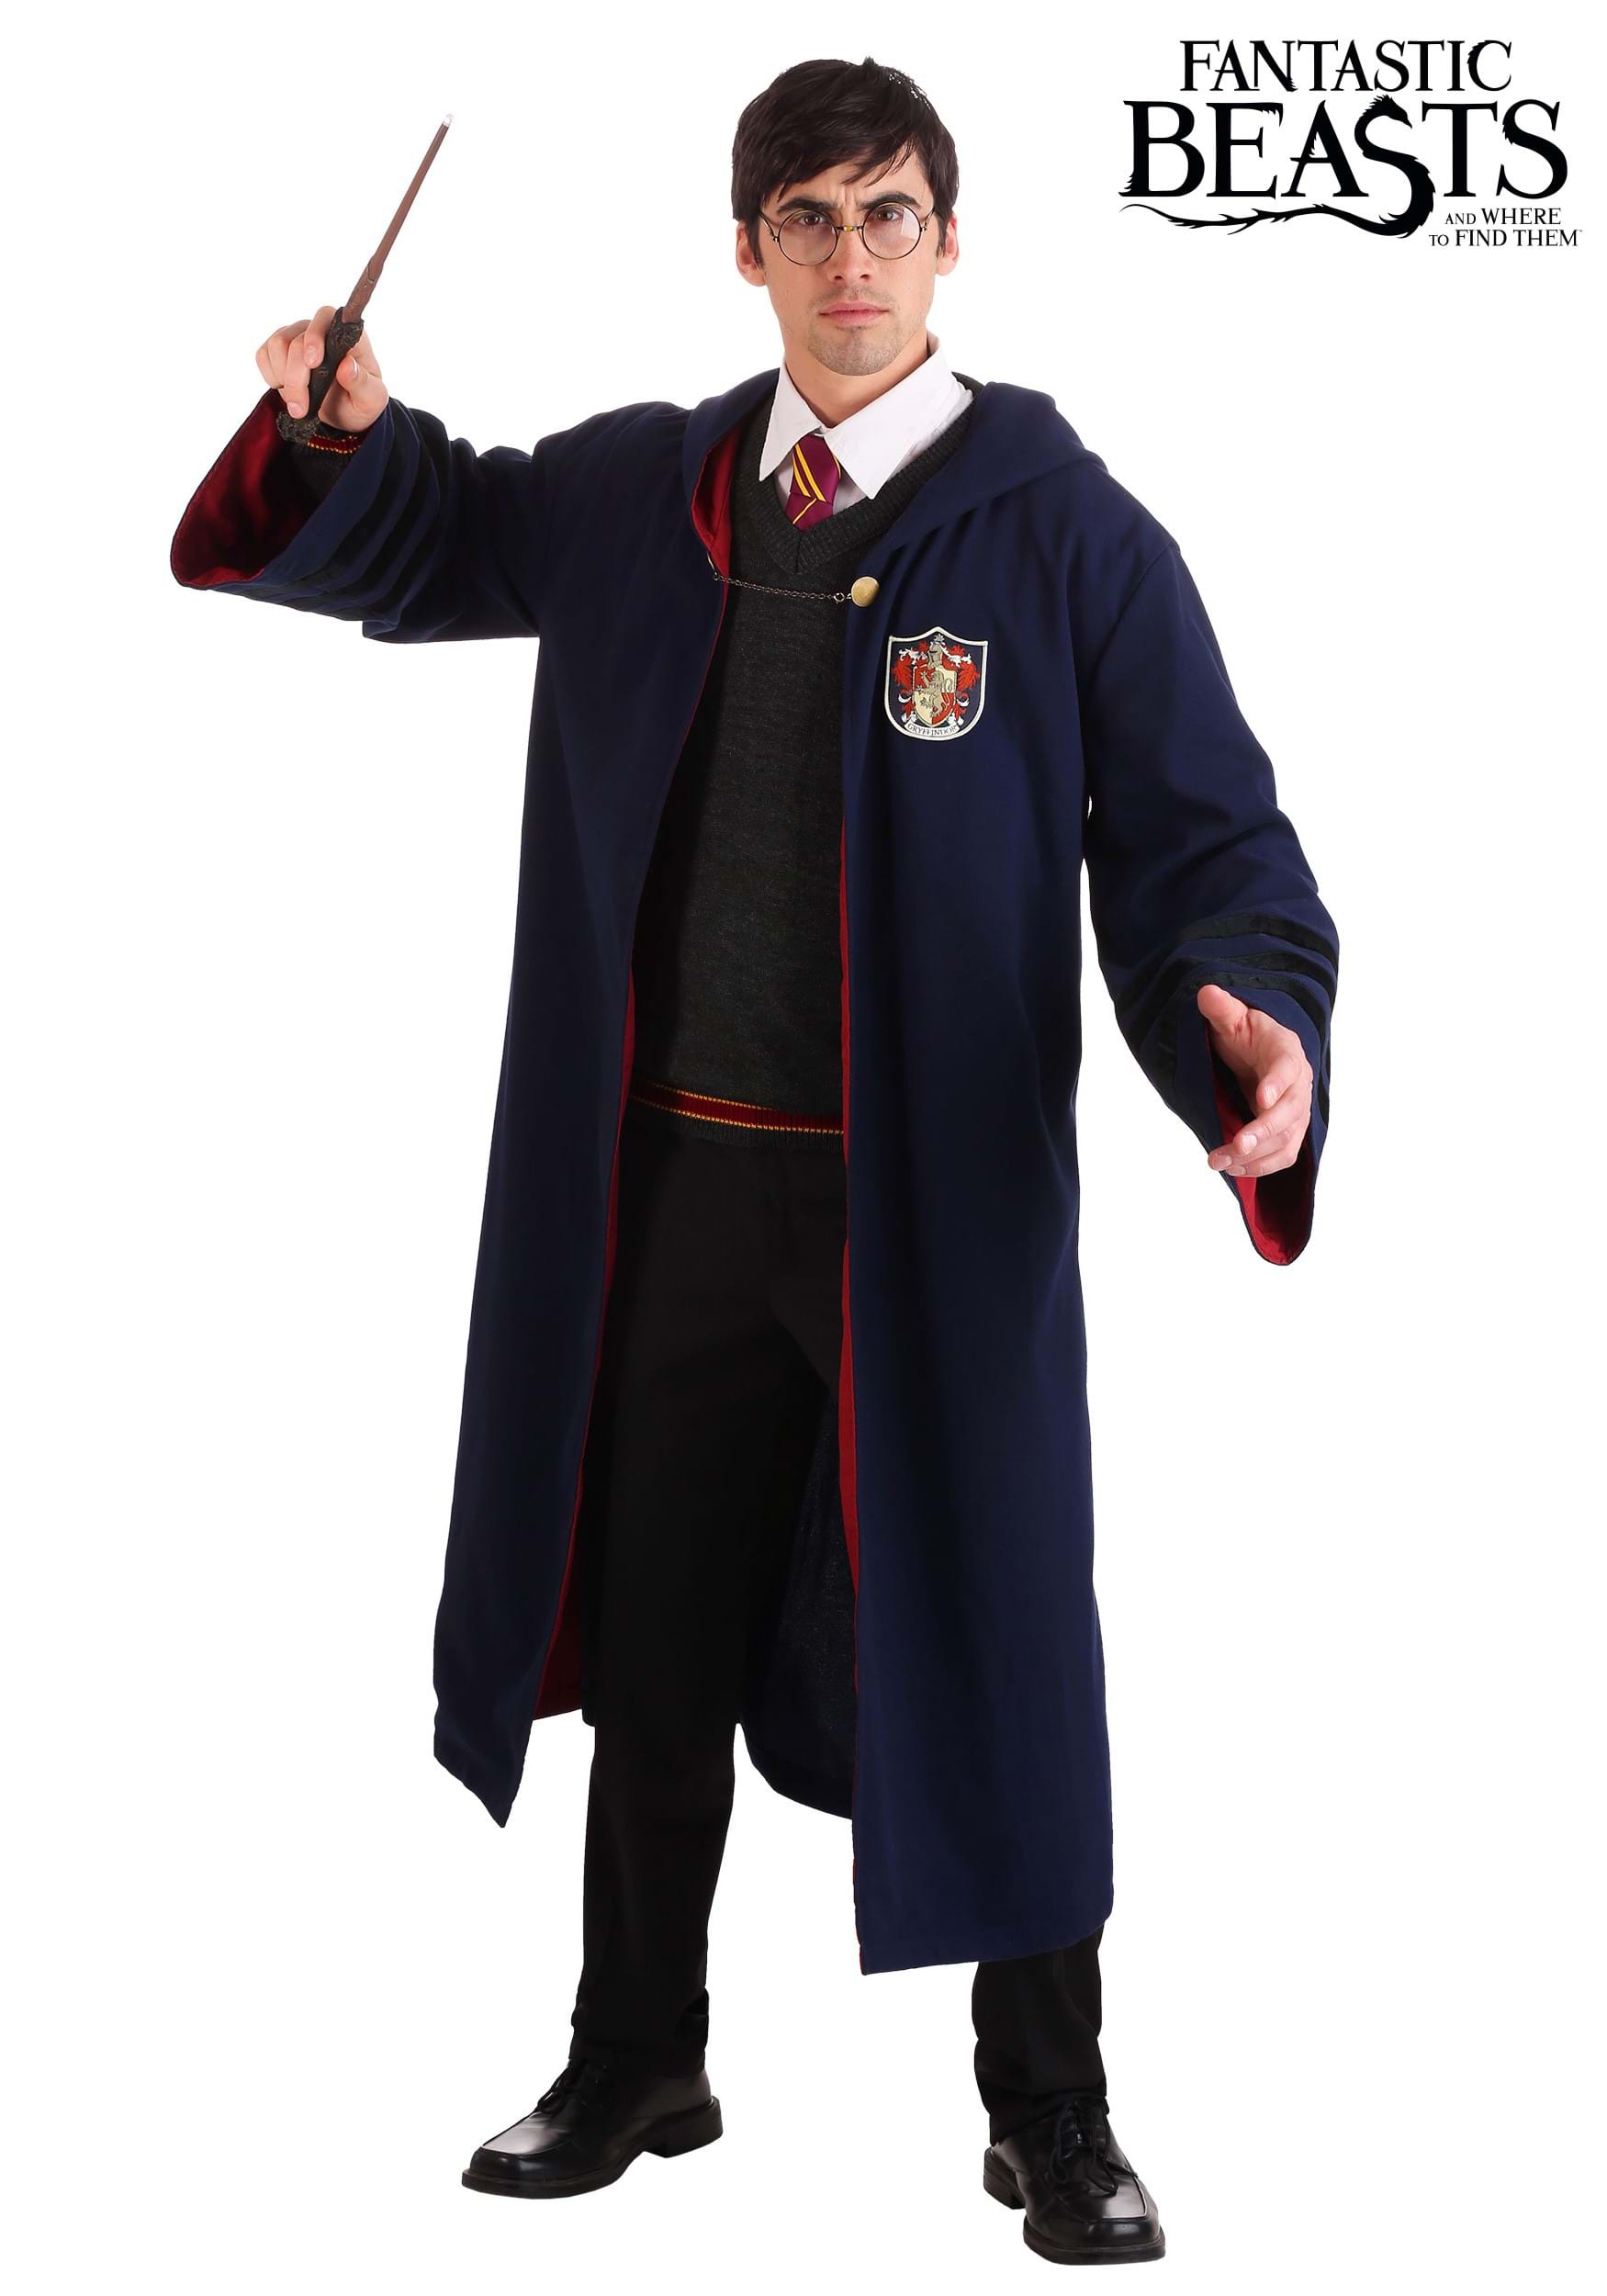 Harry Potter Robe Official Hogwarts Wizarding World Costume Robes